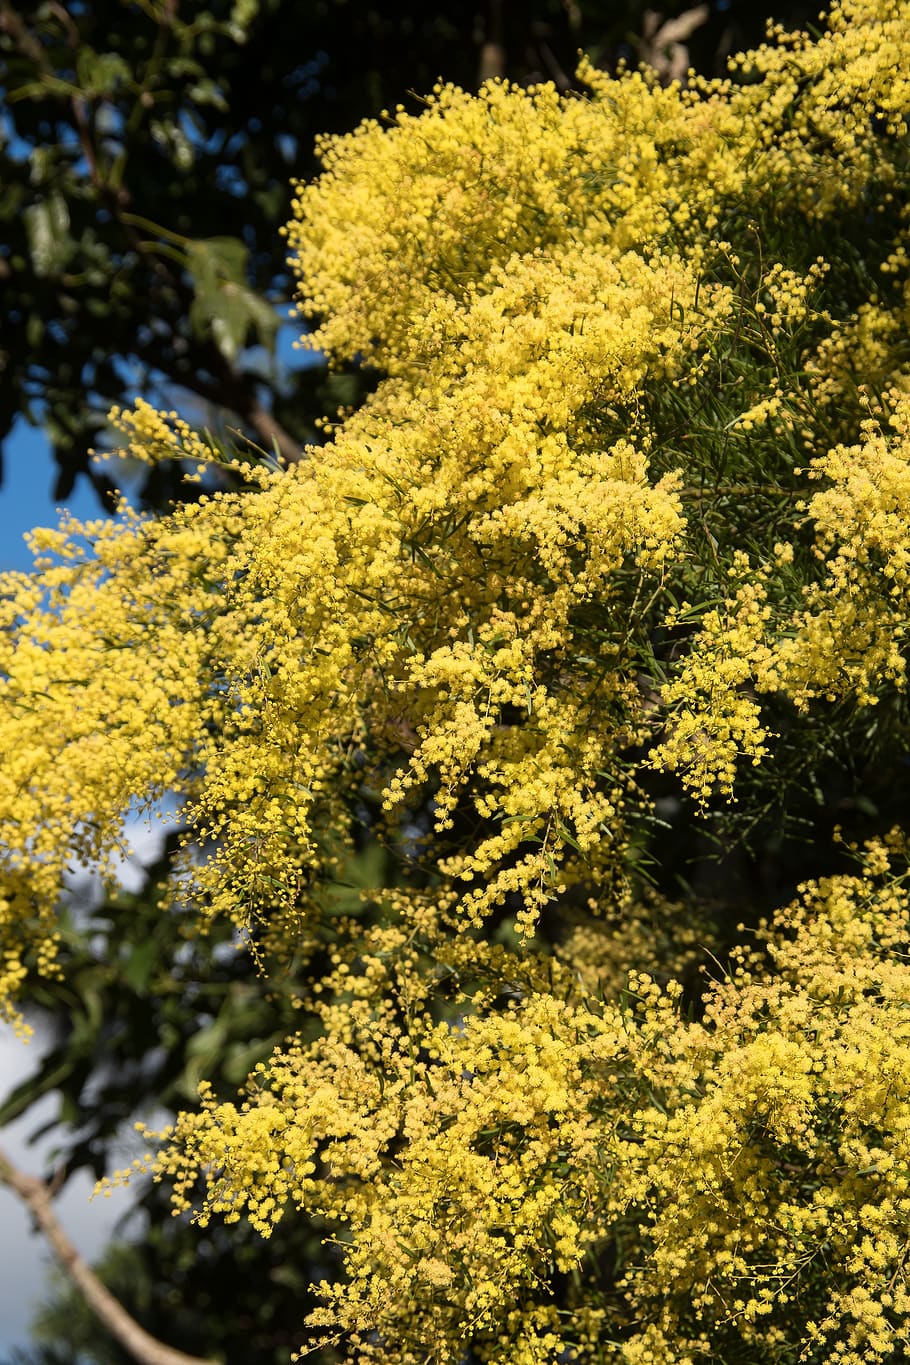 acacia, wattle, flowers, yellow, fluffy, australian native, many, plant, growth, beauty in nature